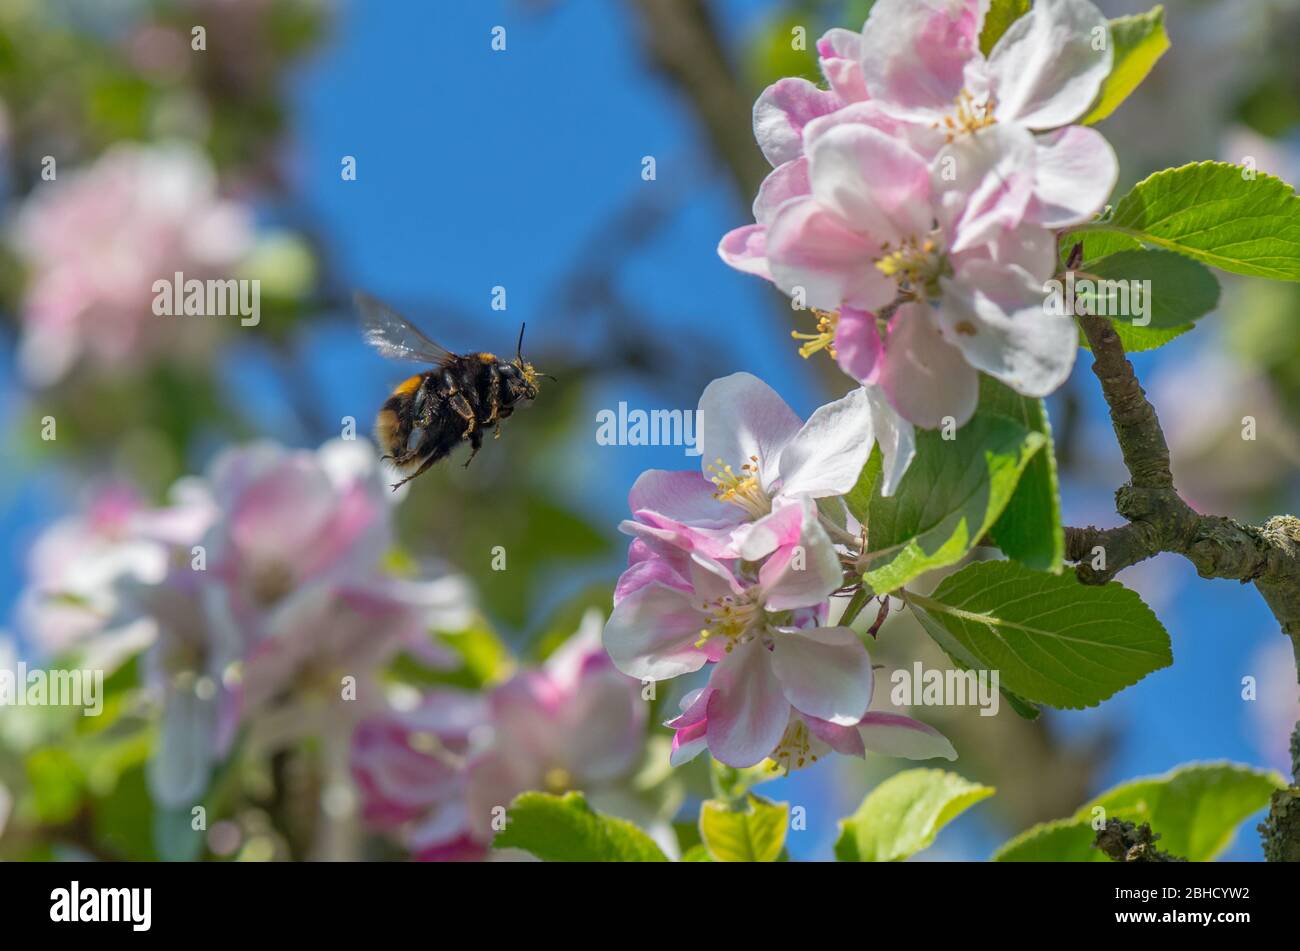 Bumble bee flying towards the blossom of an apple tree. Stock Photo